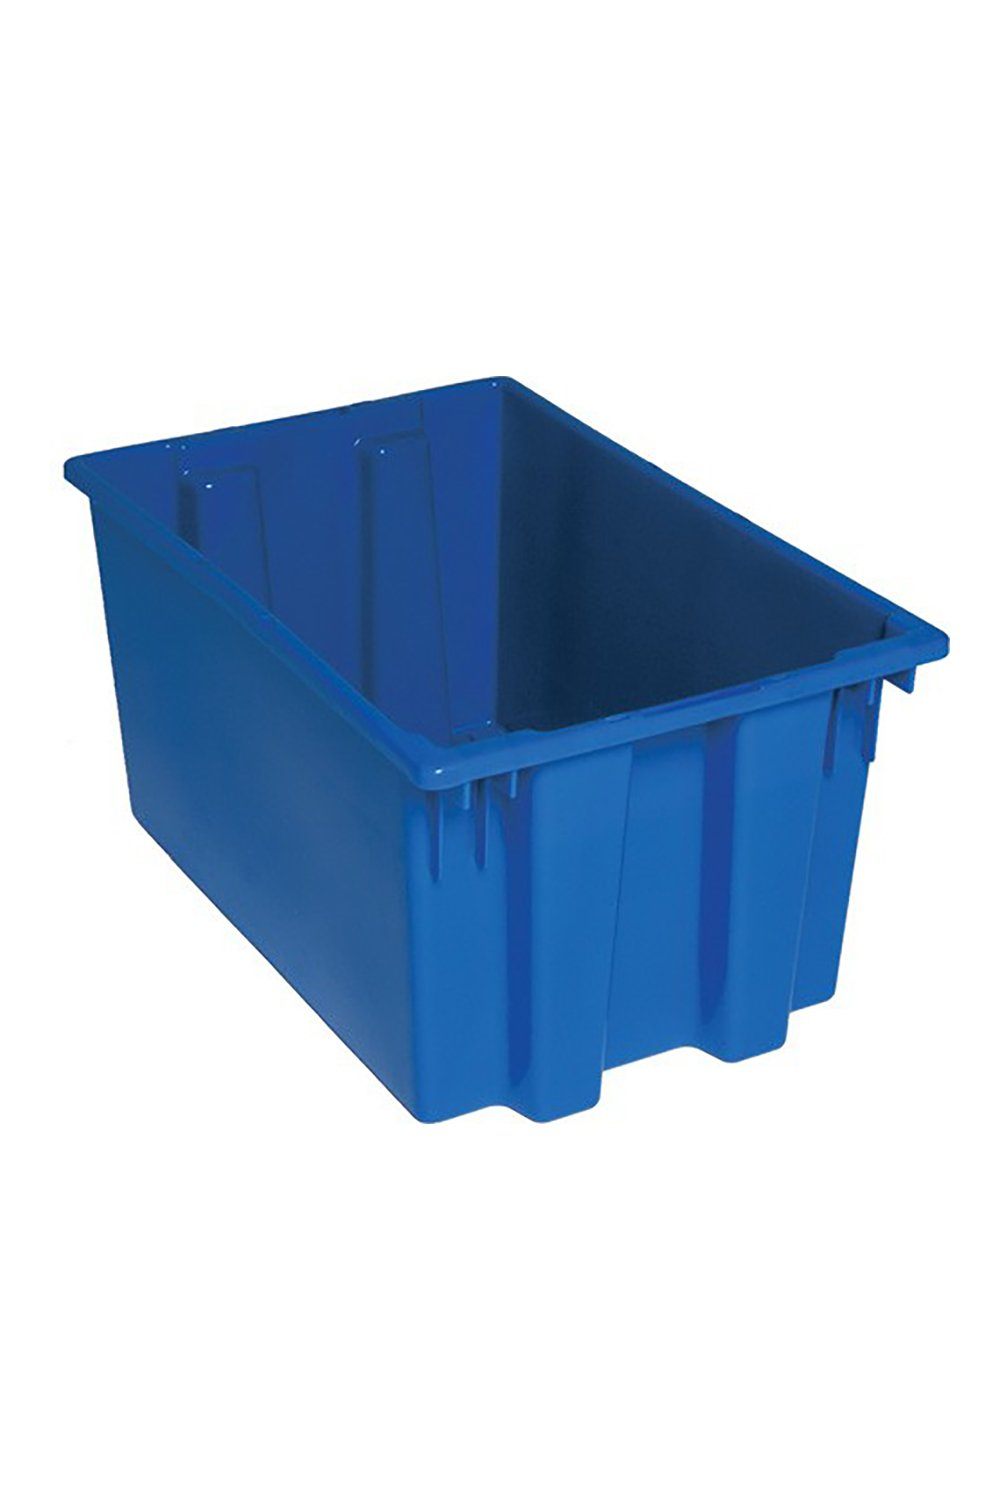 Stack and Nest Tote Bins & Containers Acart 23-1/2"L x 15-1/2"W x 12"H Blue 